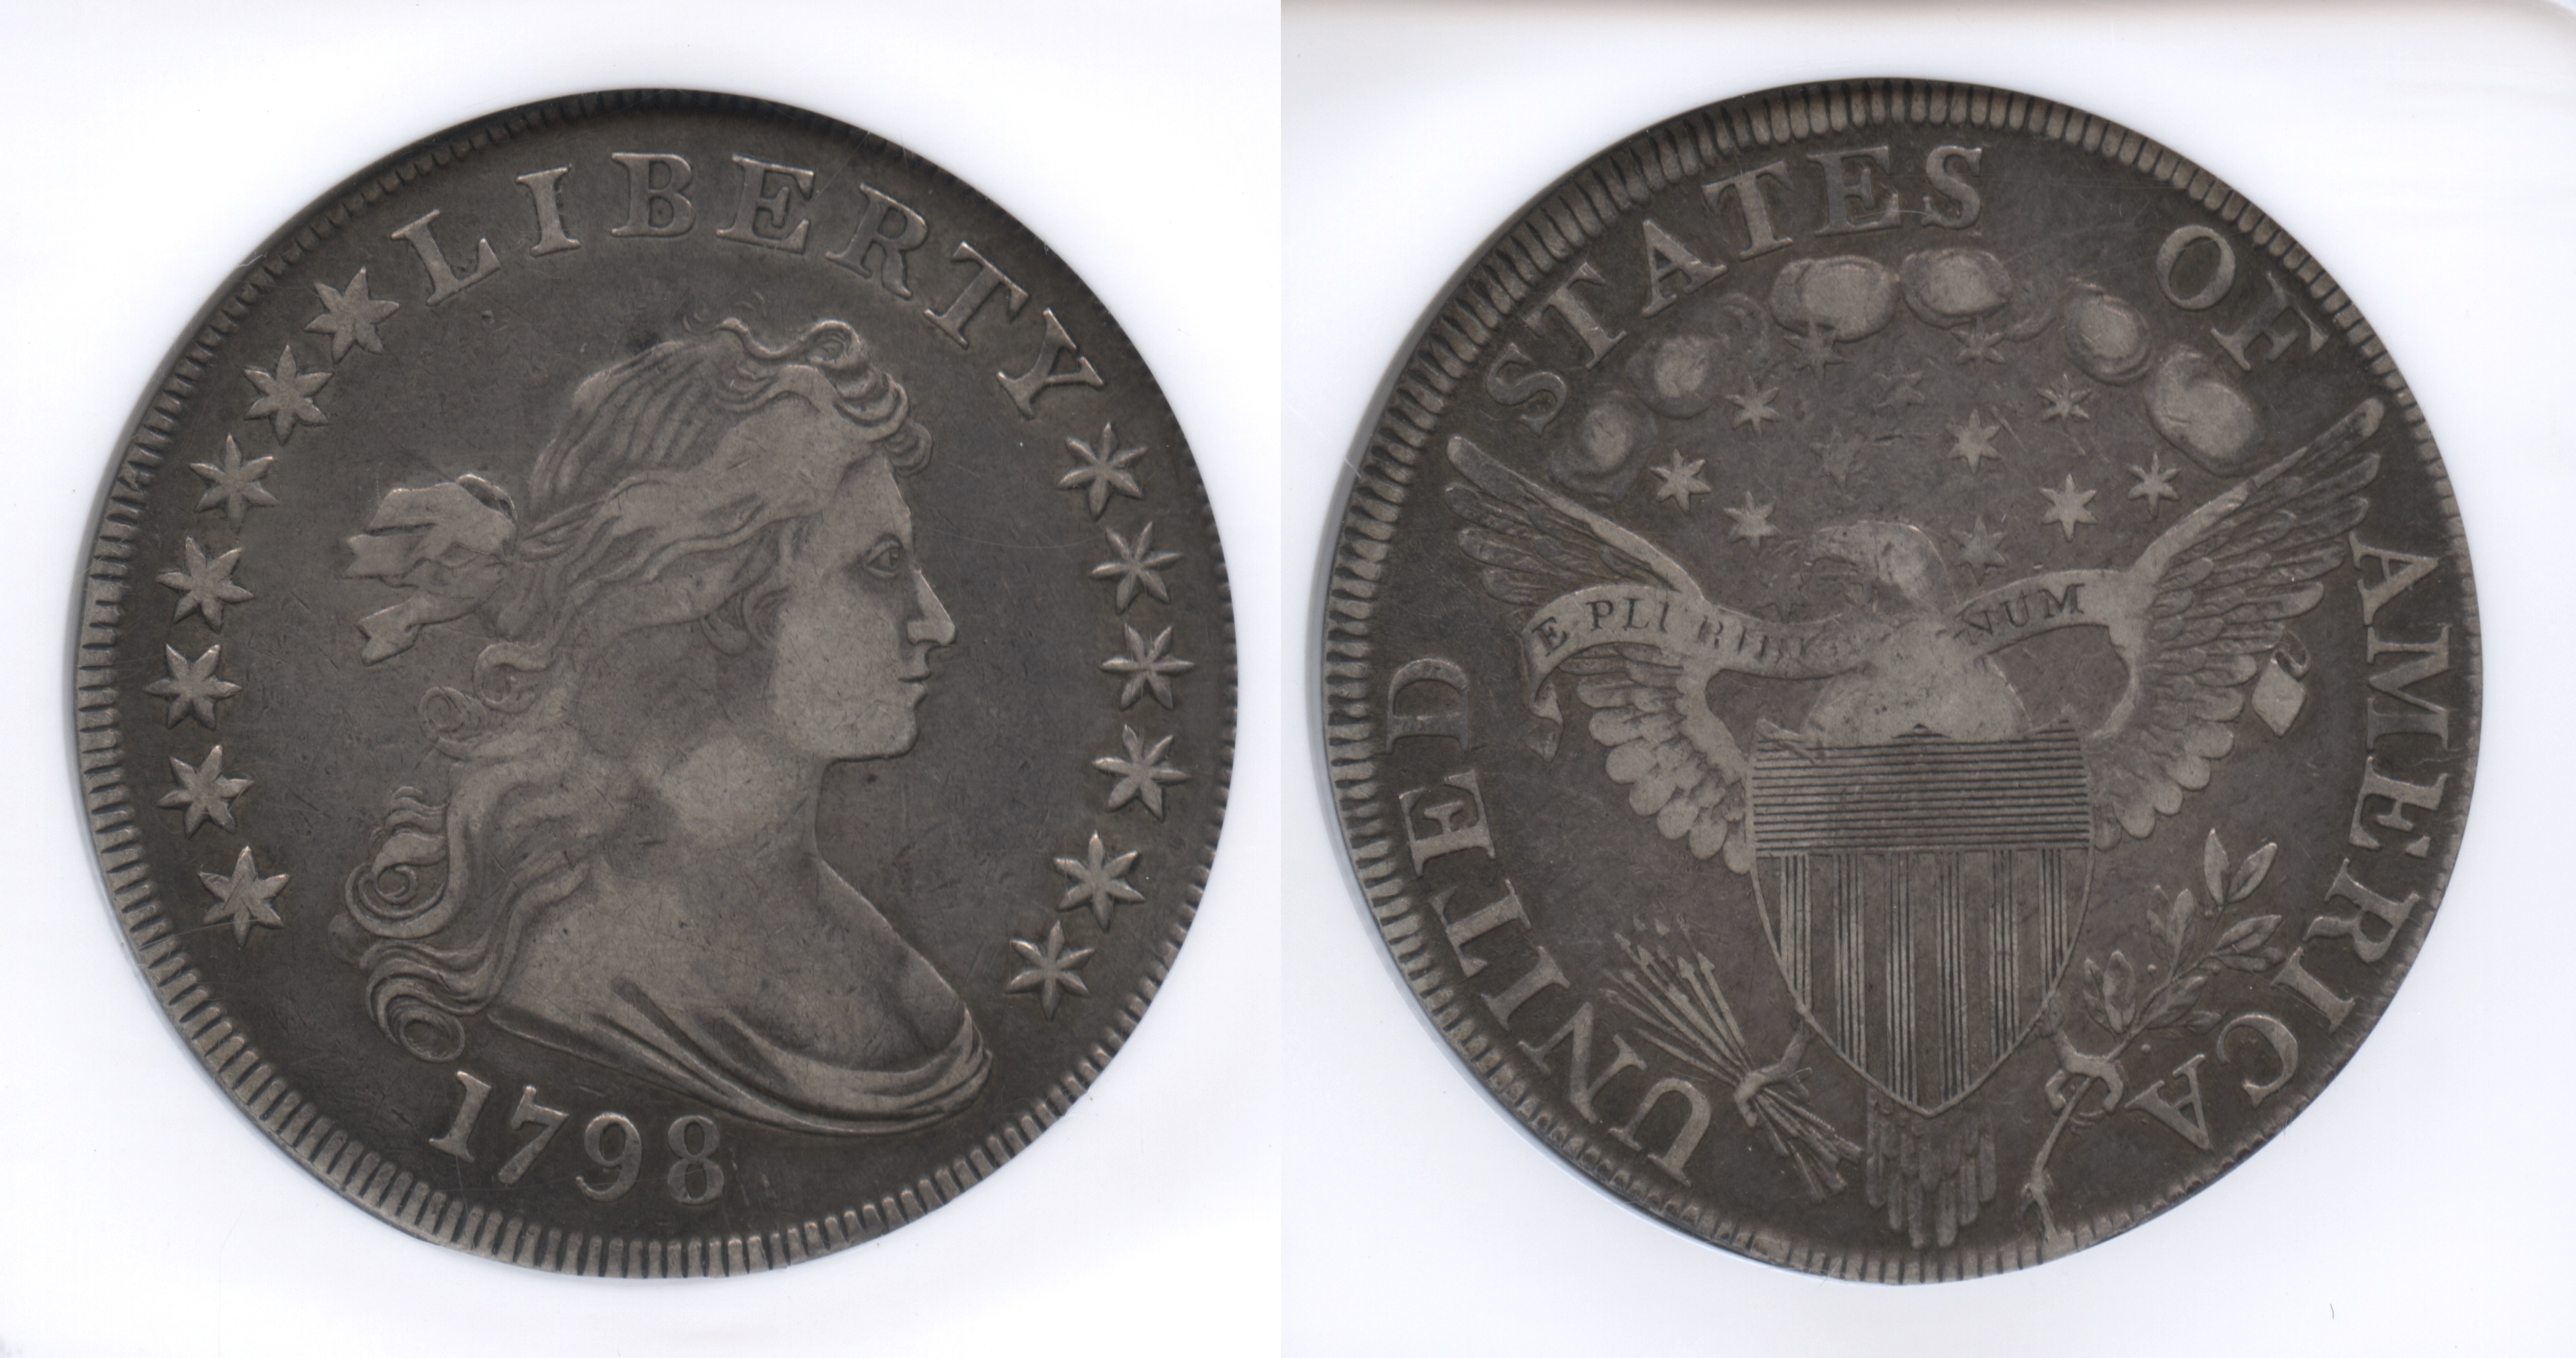 1798 Draped Bust Large Eagle Silver Dollar Pointed 9, Wide Date, BB-124, B-24 ANACS VF-30